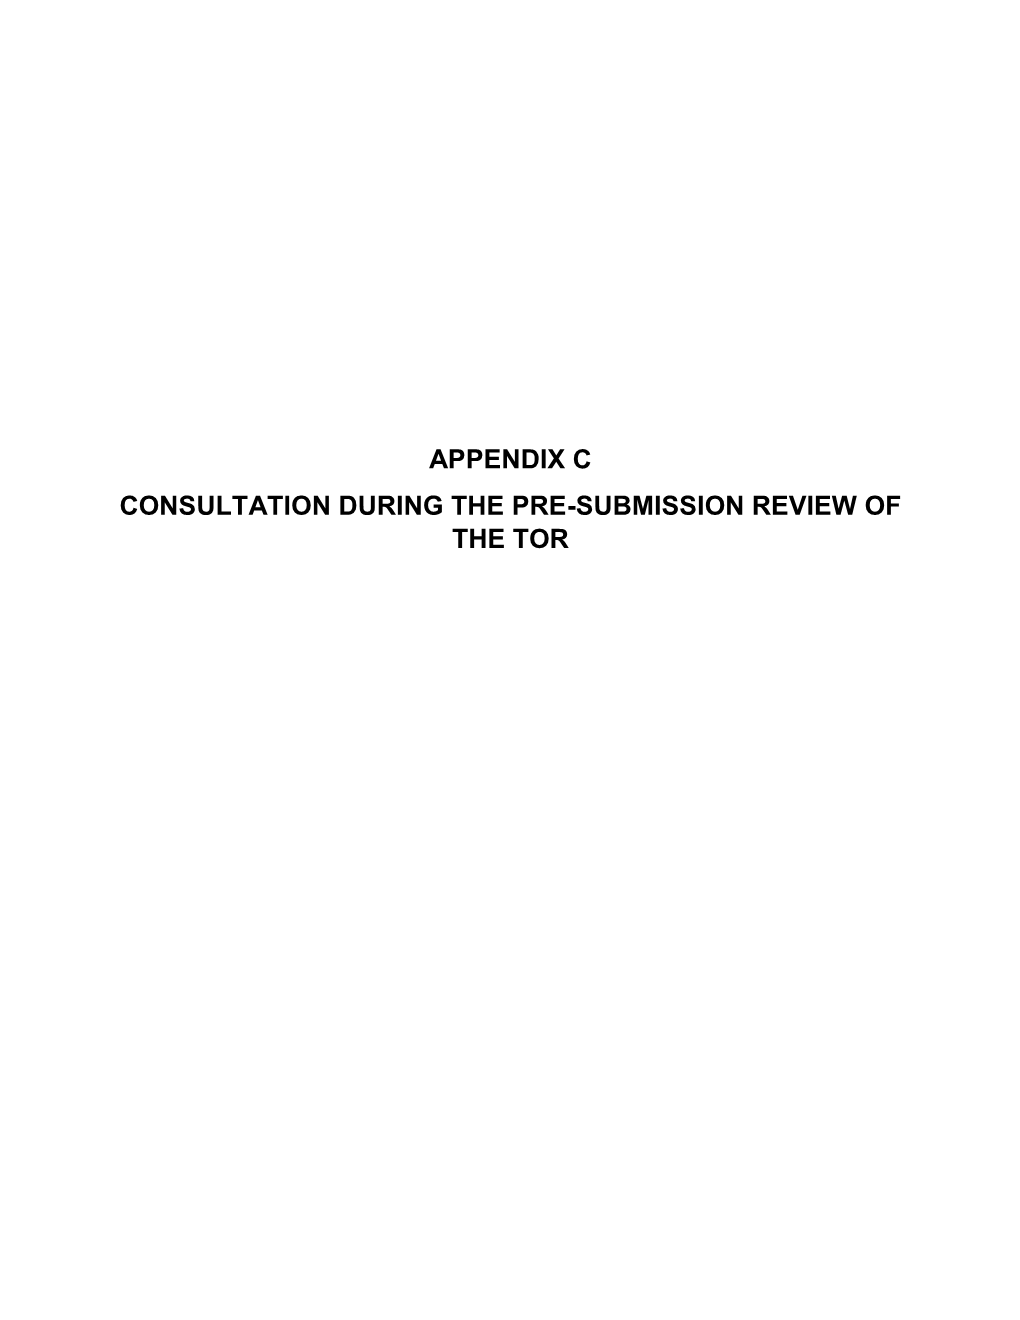 Appendix C Consultation During the Pre-Submission Review of the Tor